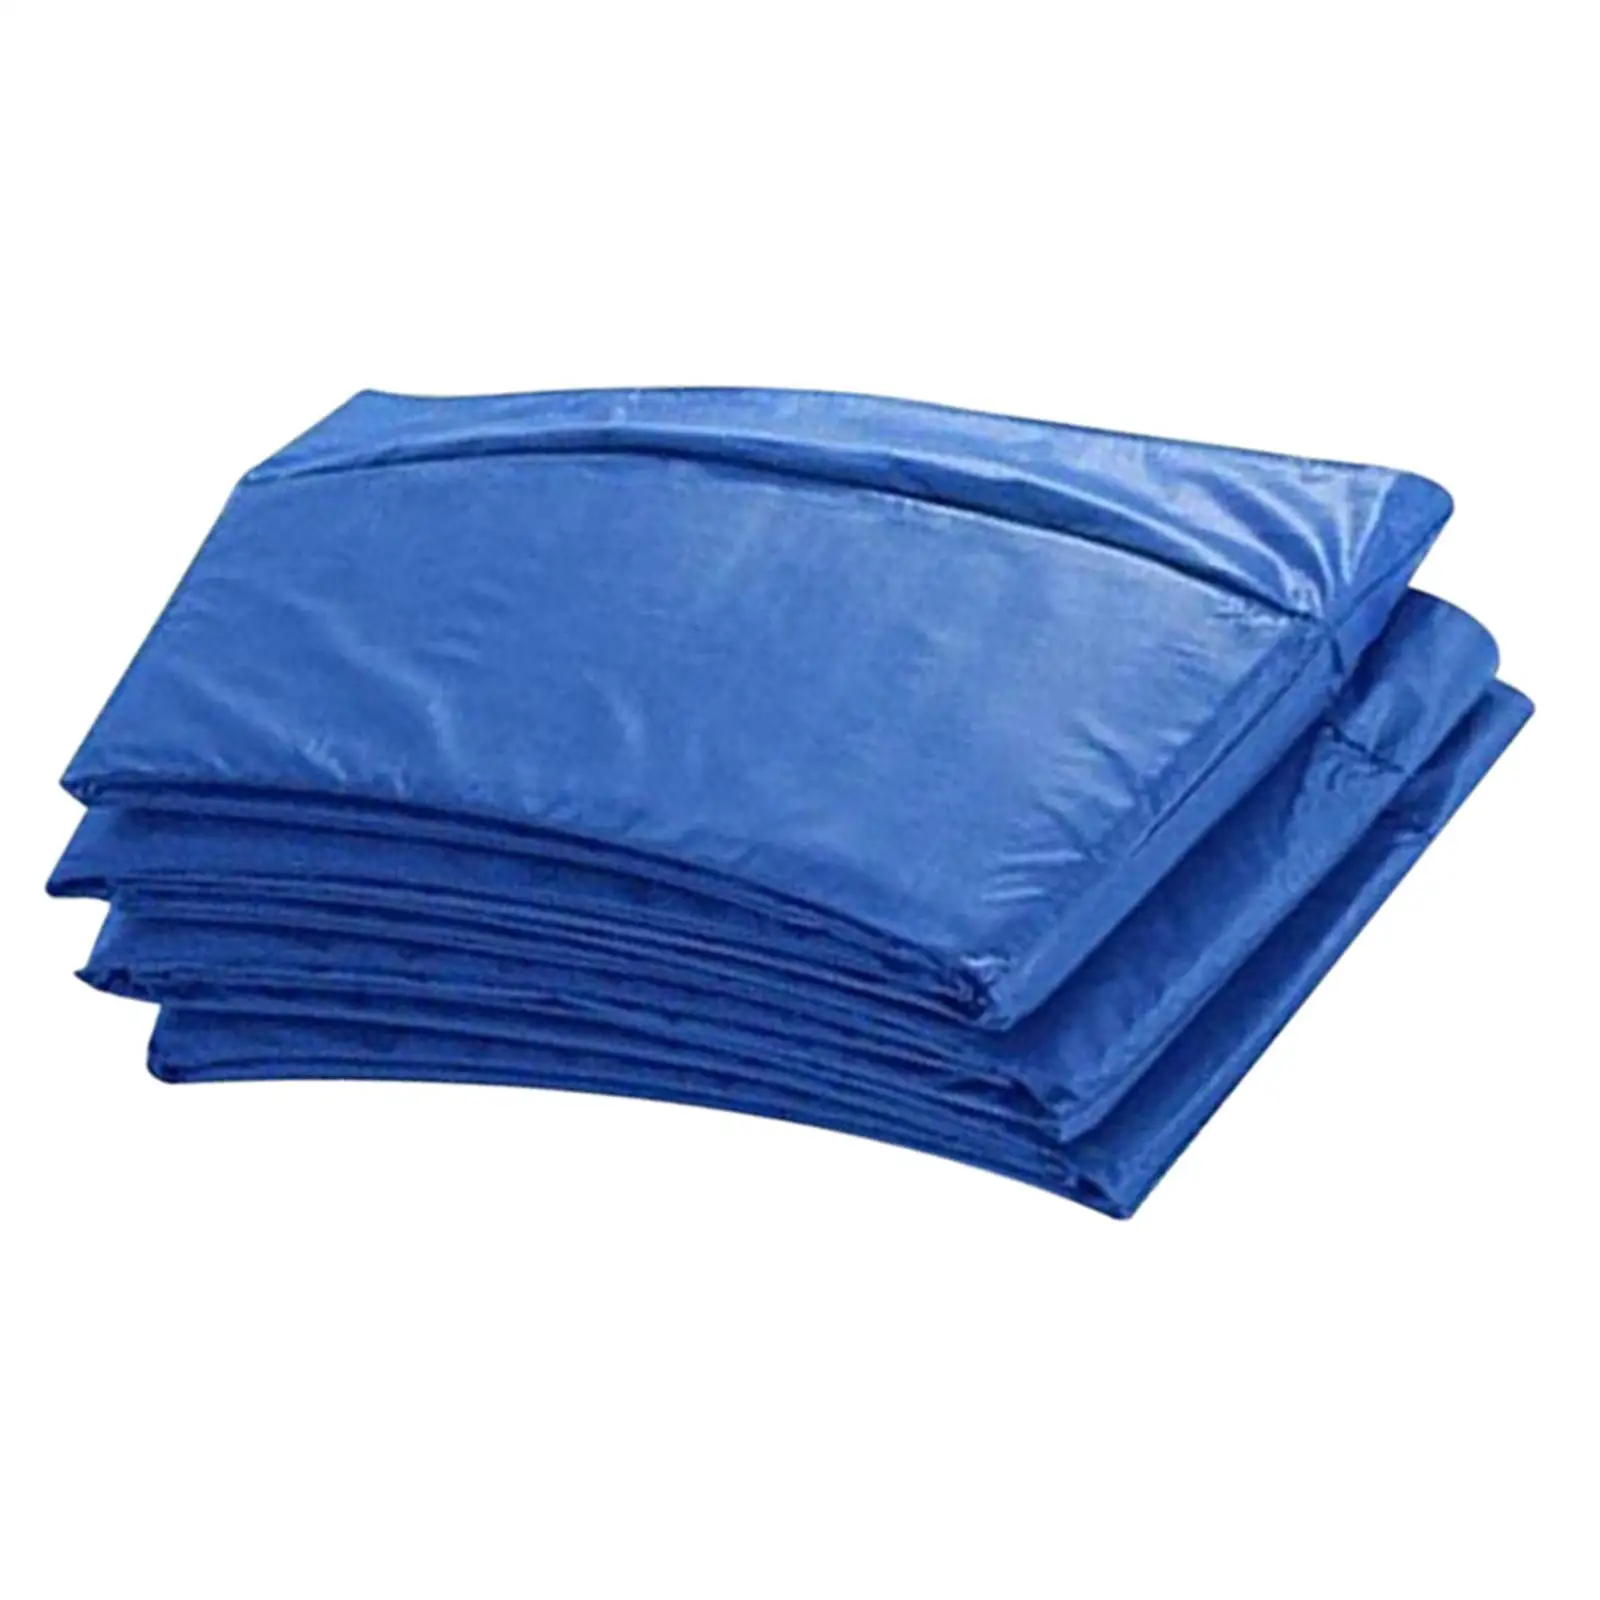 Trampoline Pad Fits Round Trampoline Frame 12ft Mat Trampoline Edge Cover